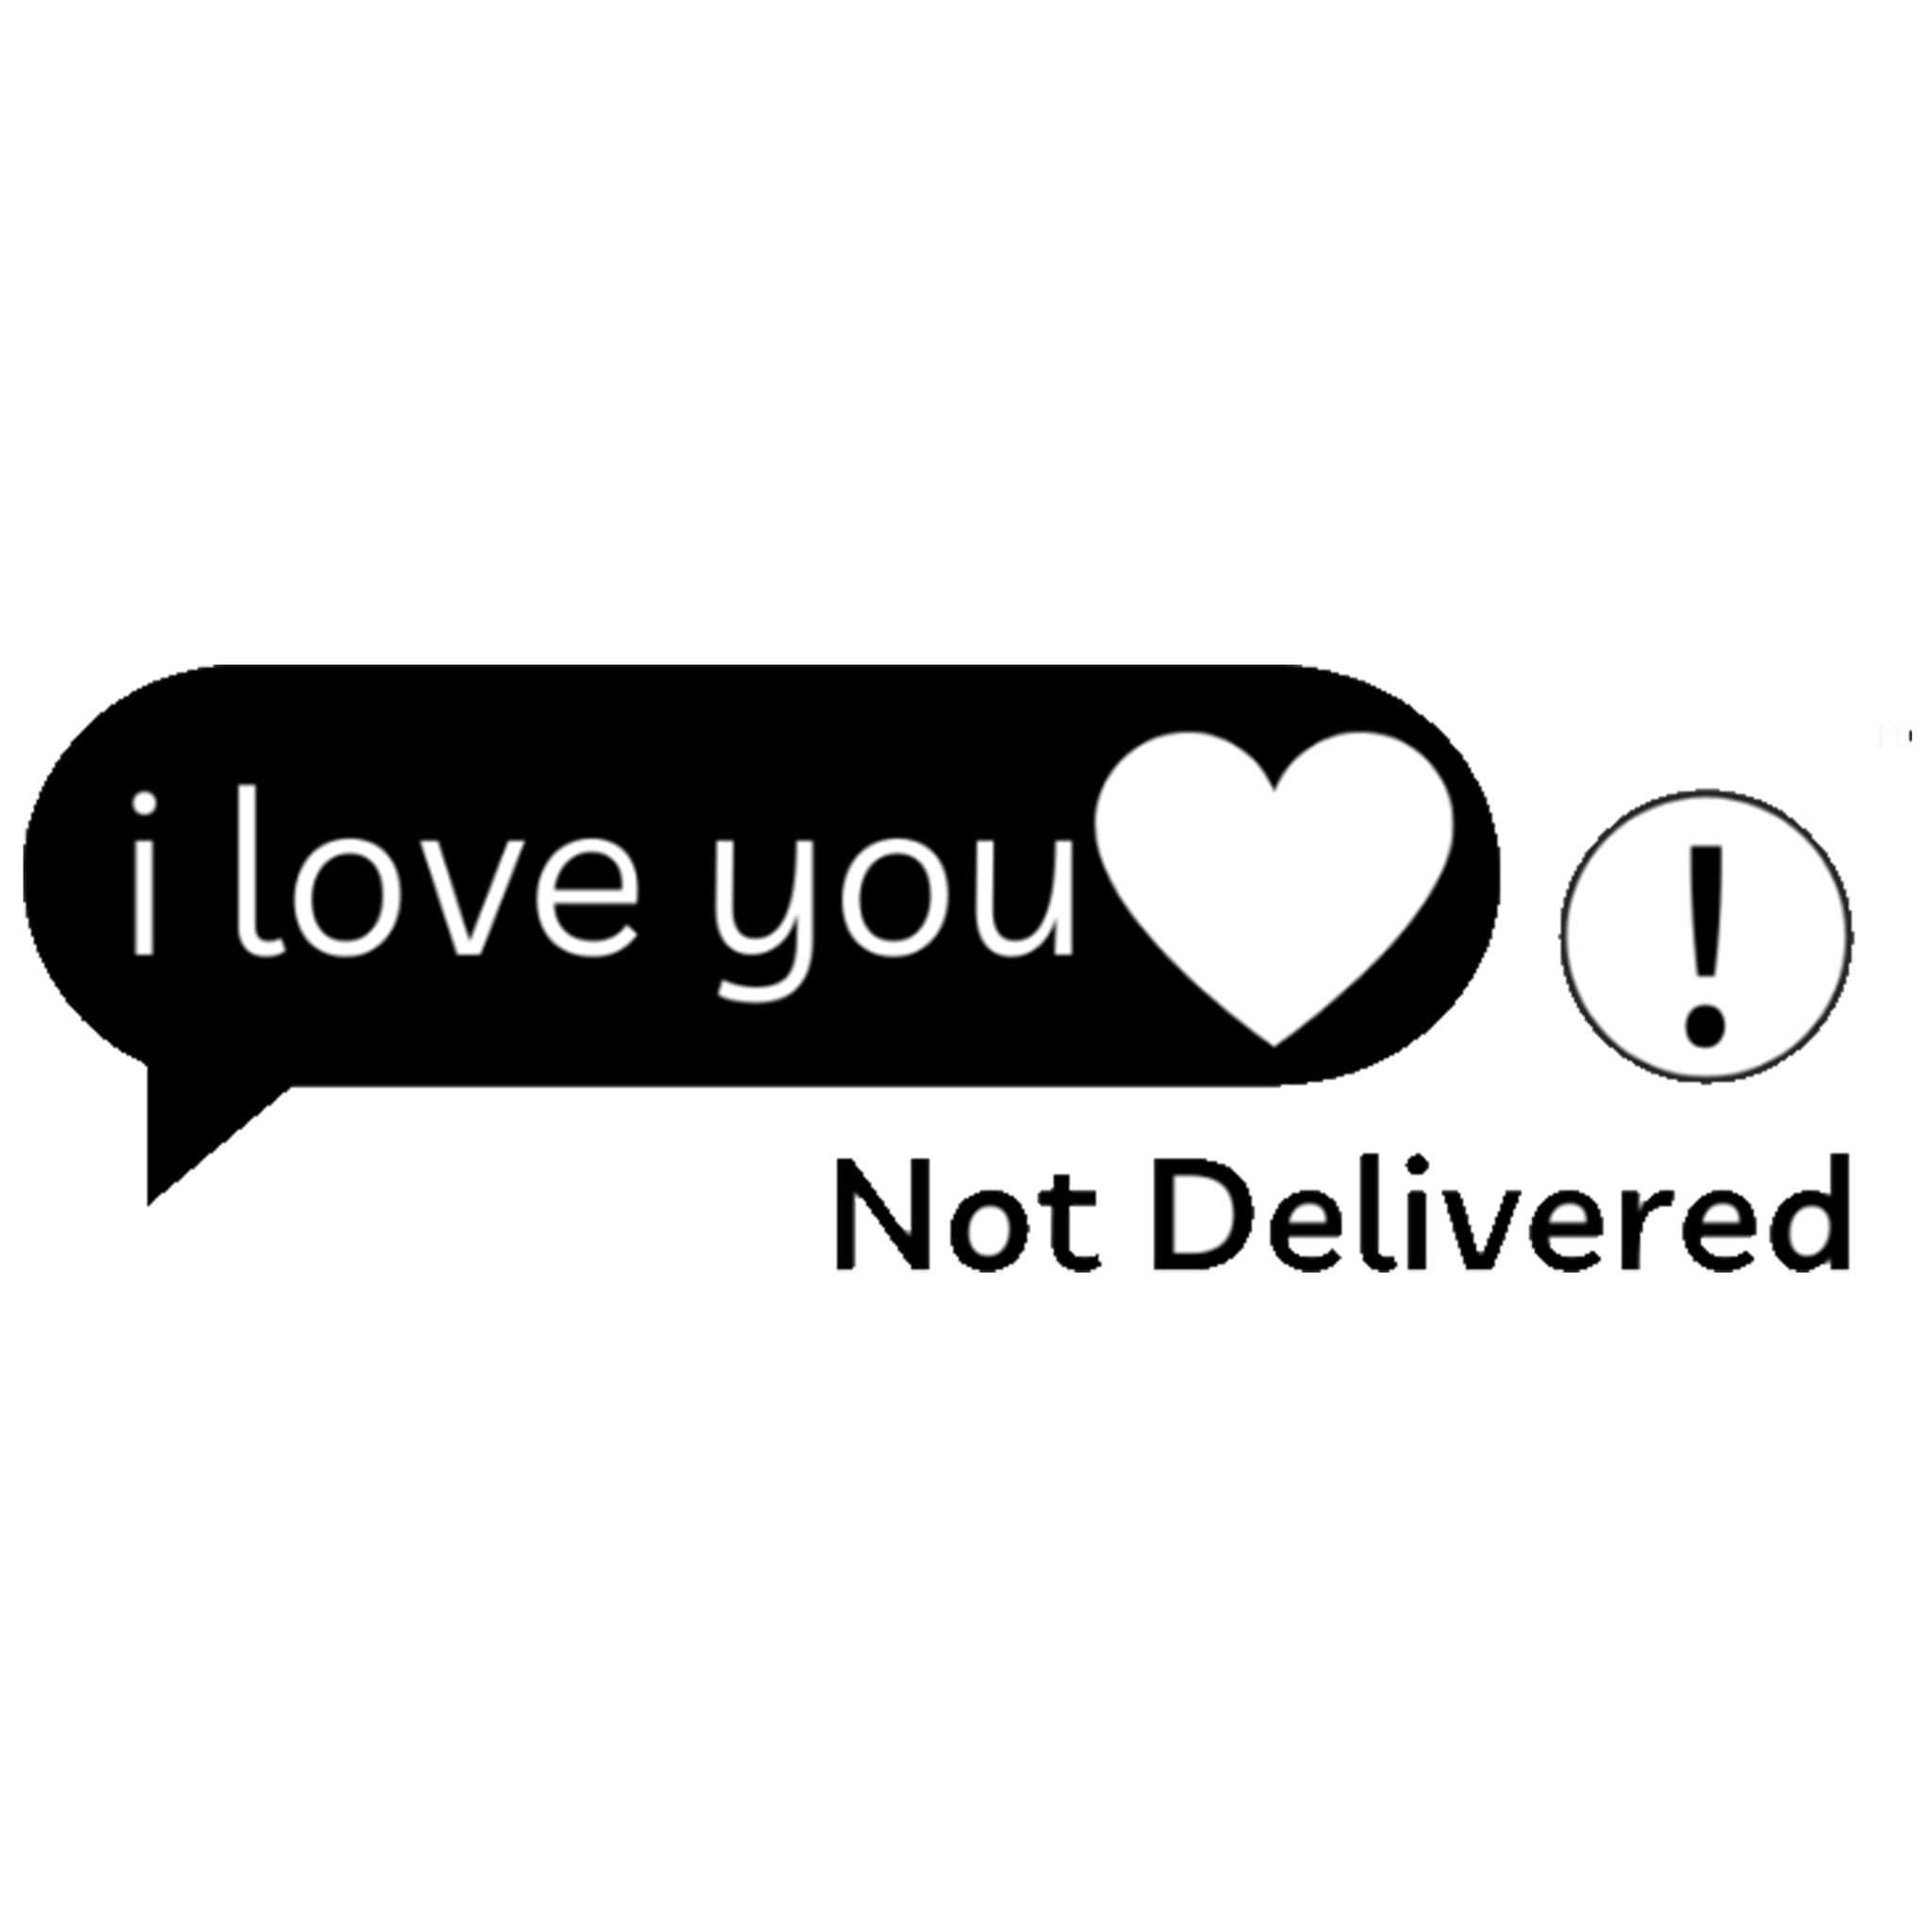 STICKER NOT DELIVERED - Iconic Stickers